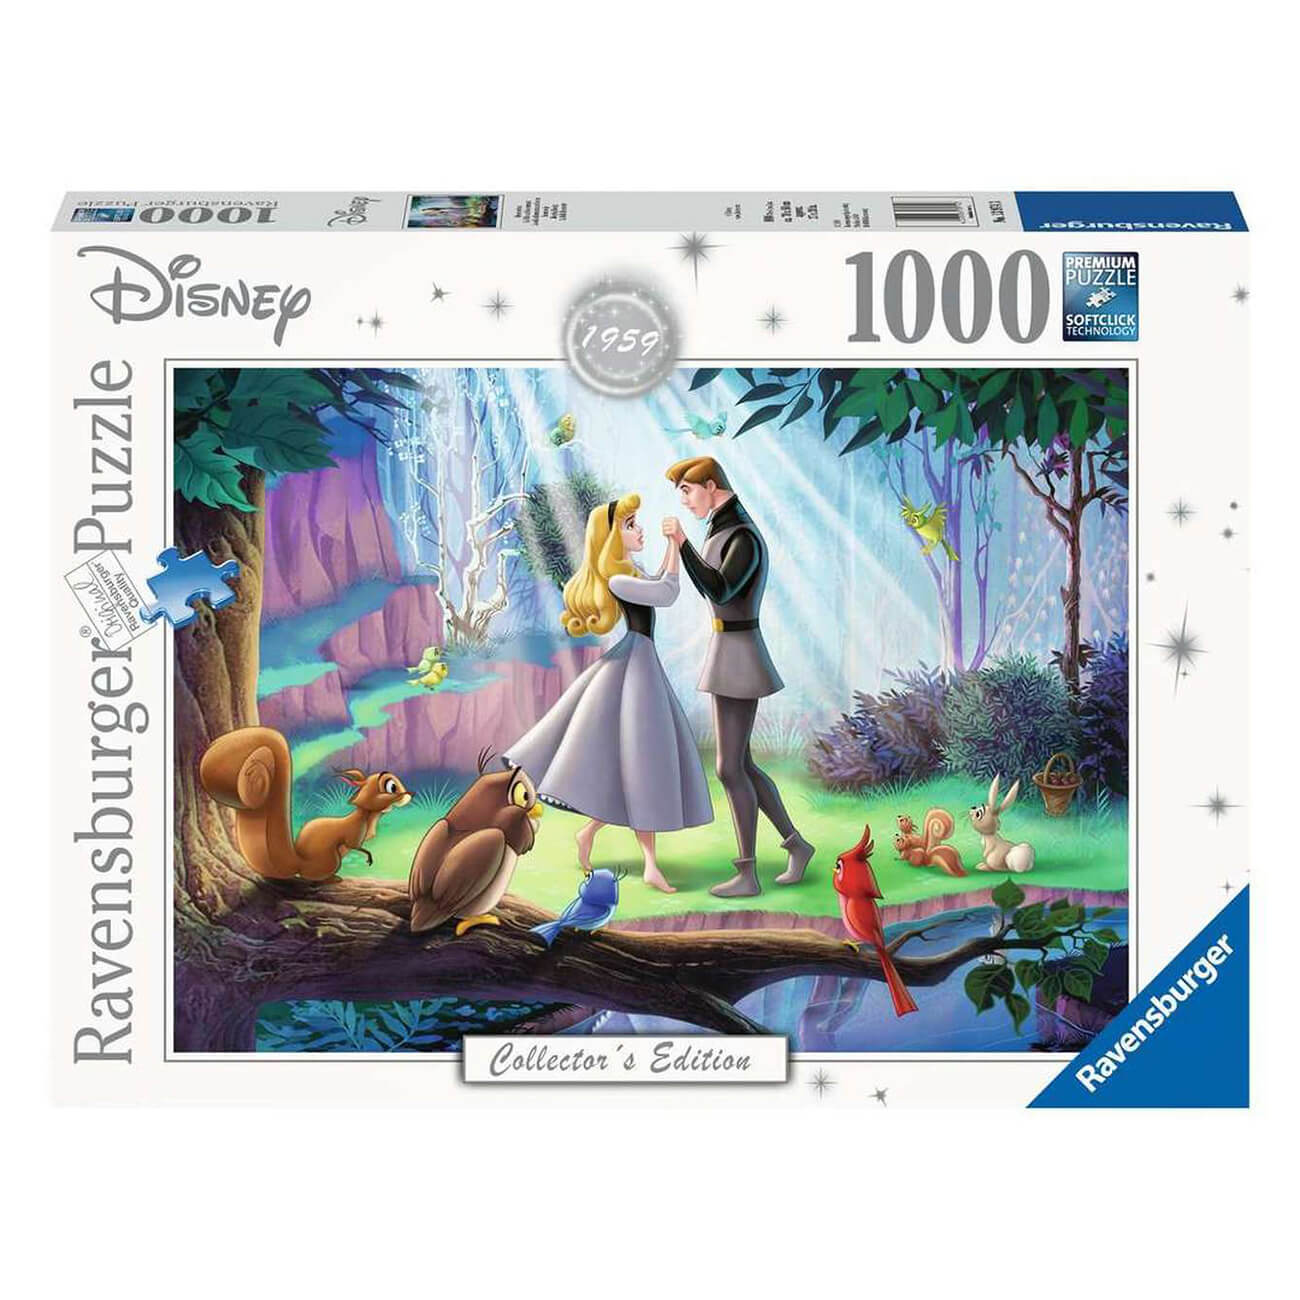 Ravensburger Disney Collector's Edition Sleeping Beauty 1000 Piece Puzzle